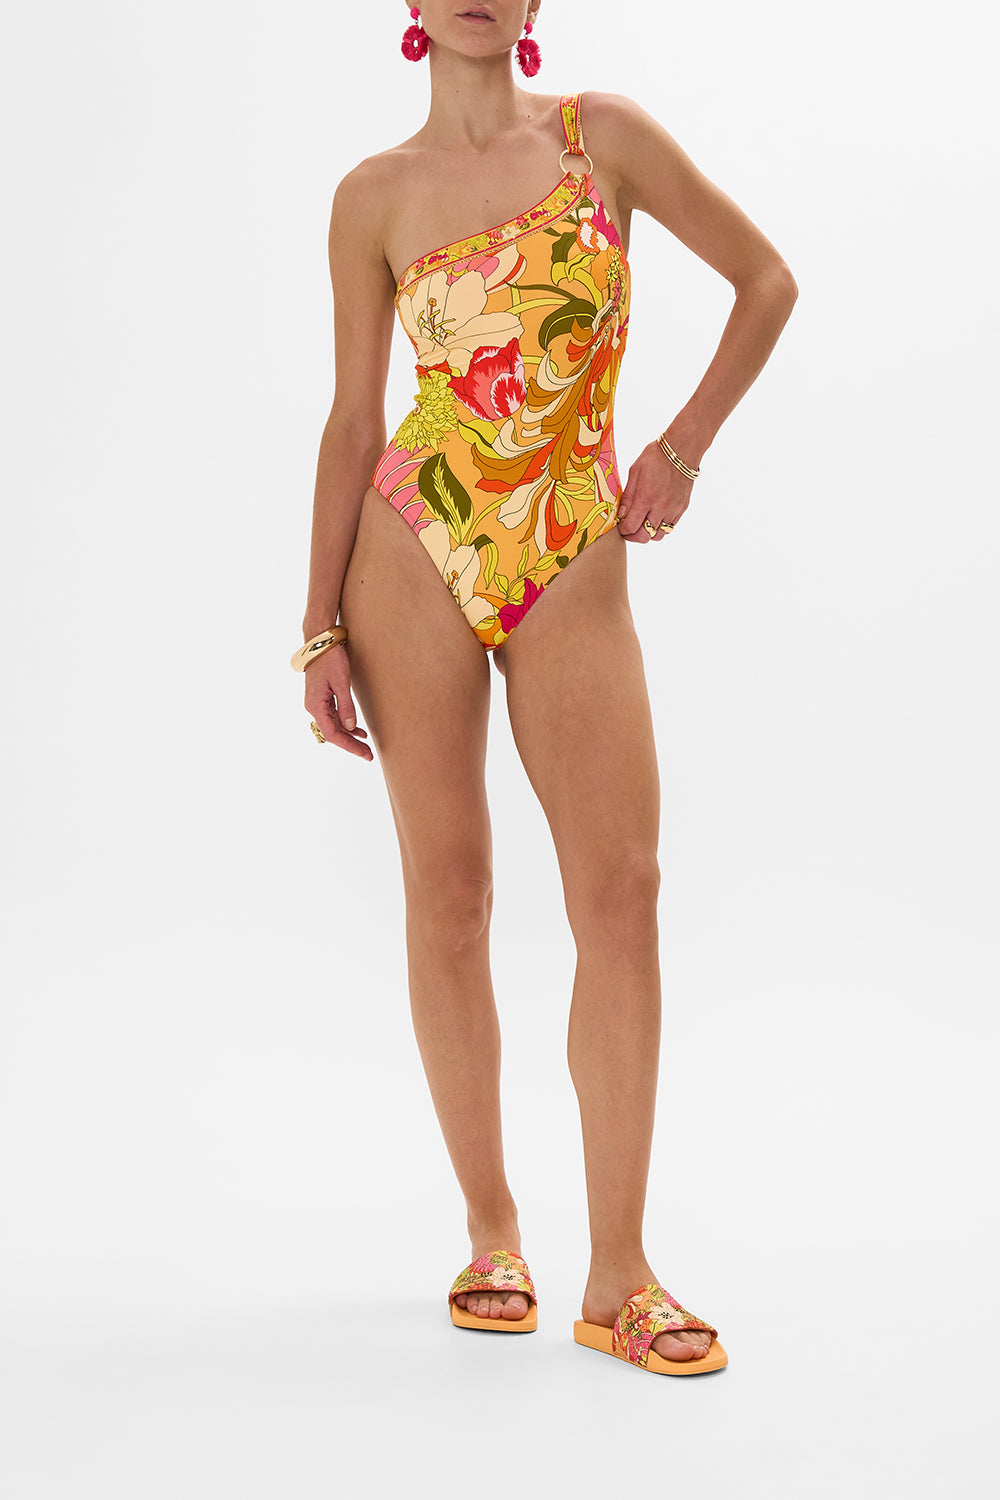 CAMILLA floral one shoulder one piece in The Flower Child Society